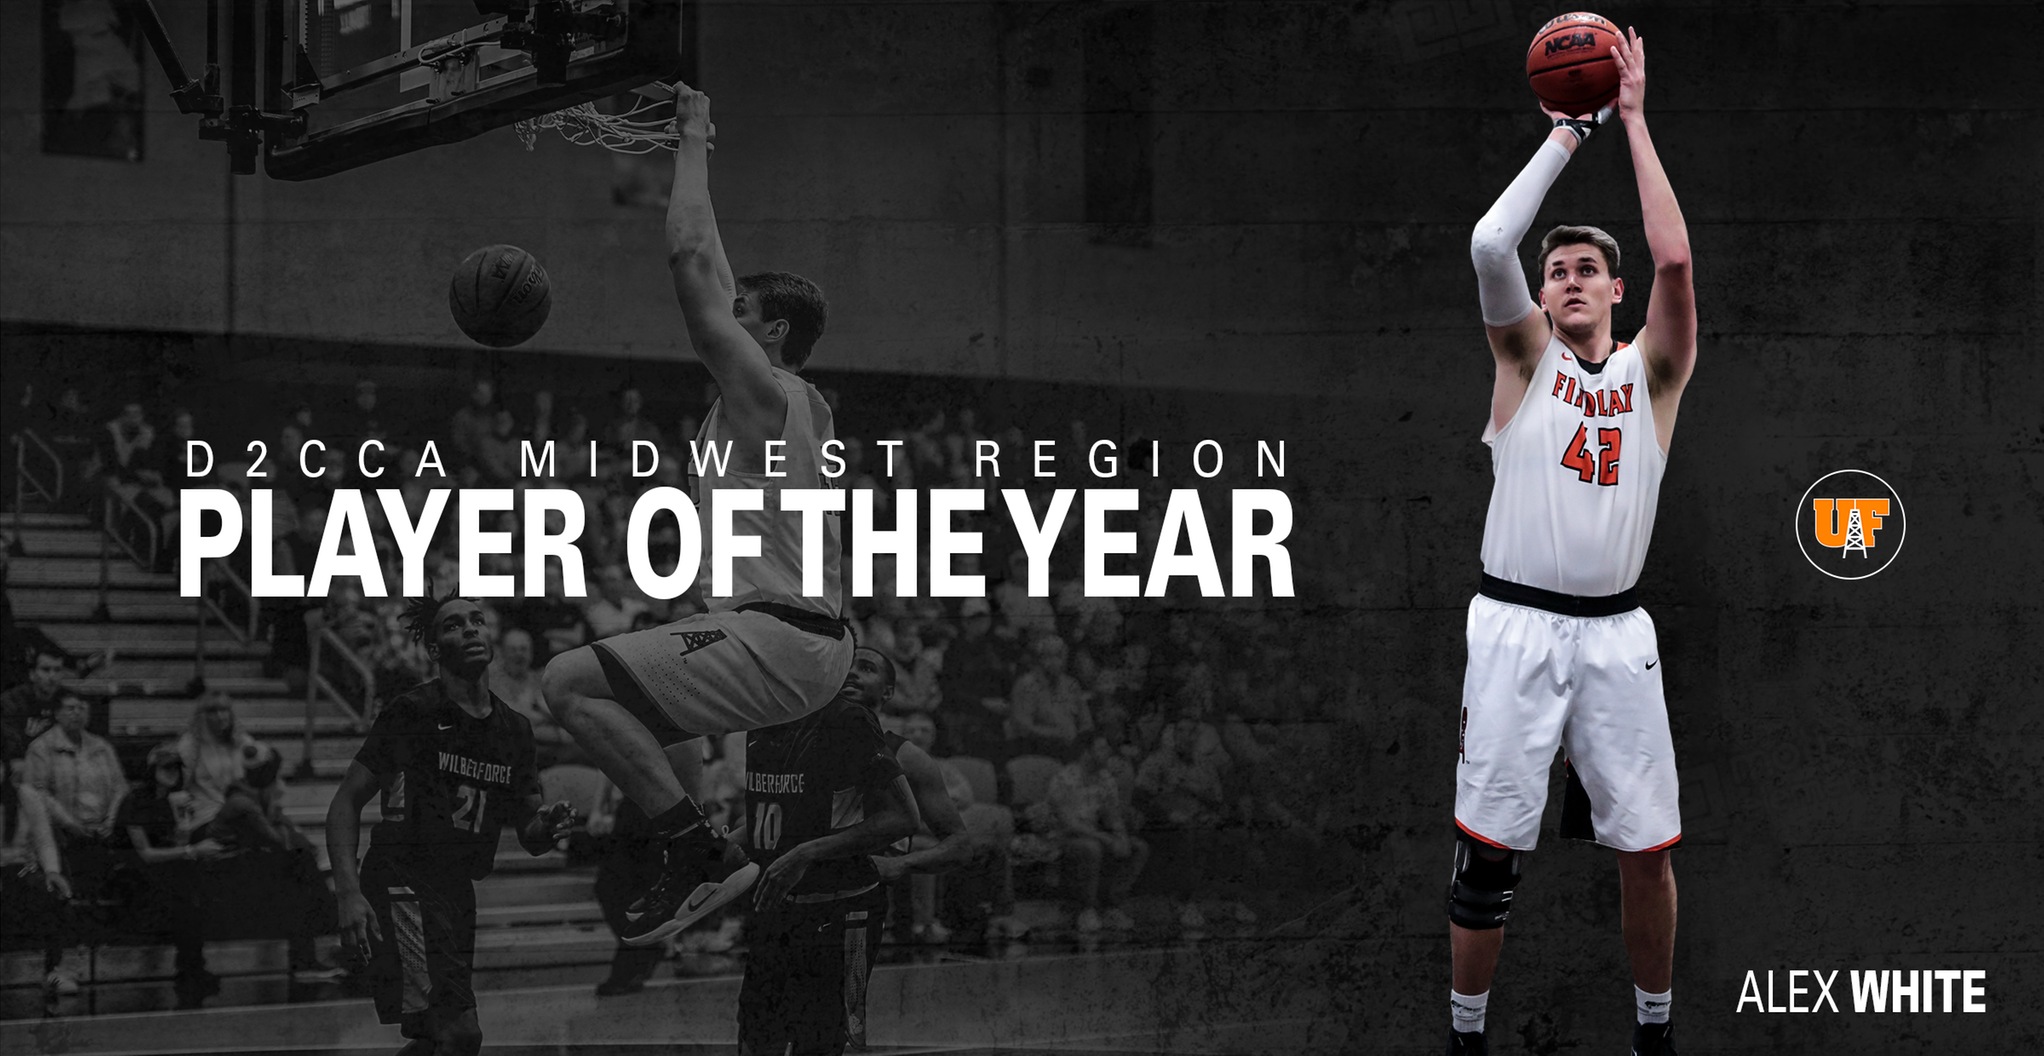 White Named D2CCA Midwest Region Player of the Year